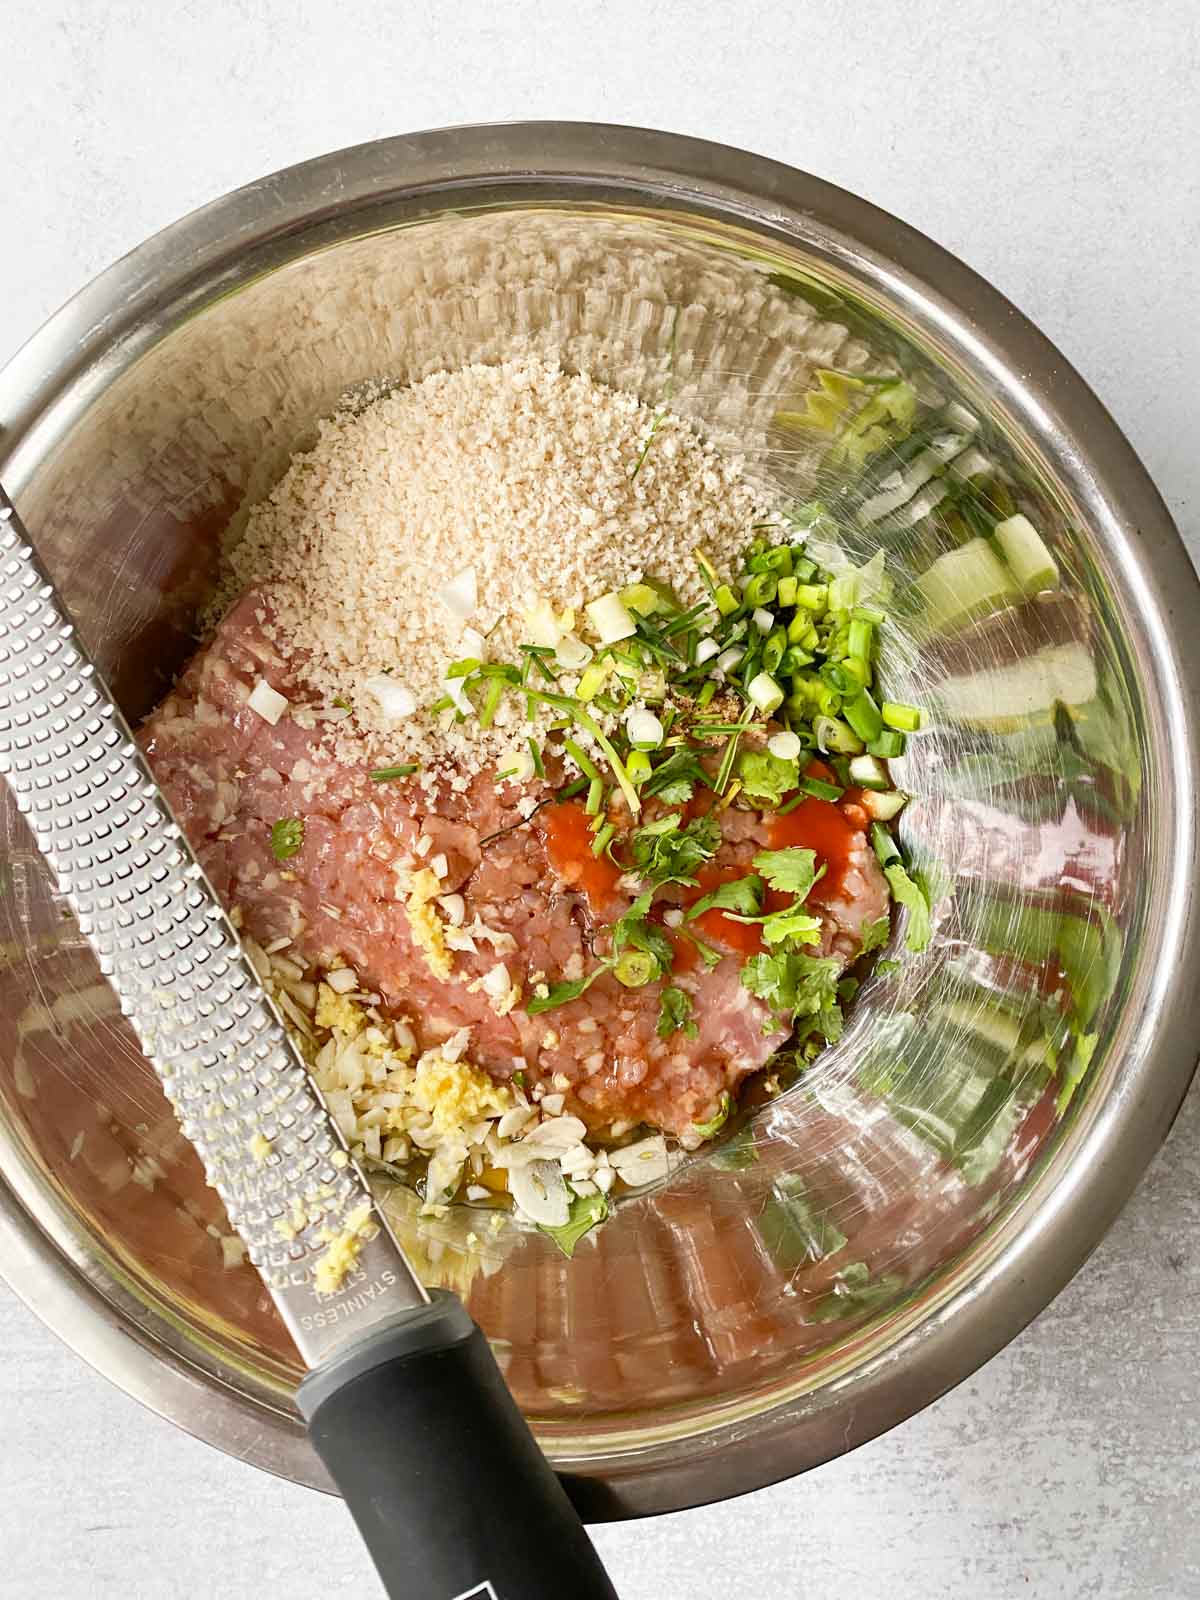 Mixing the teriyaki ingredients with raw chicken.